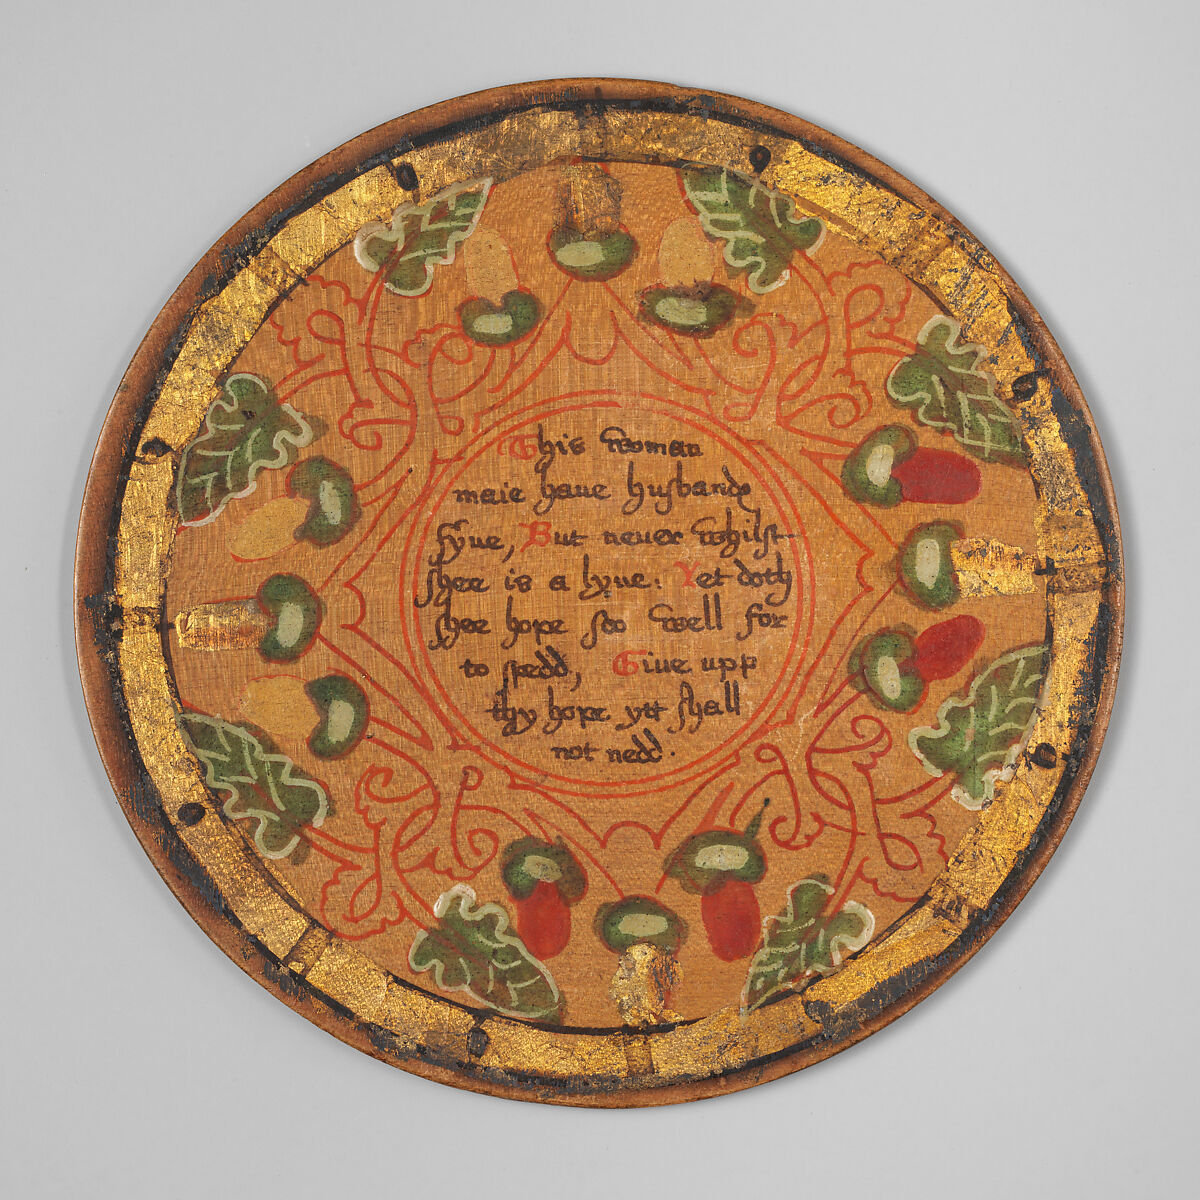 Trencher (one of a set), Oak and sycamore woods, painted, silvered and yellow varnished; inscription: ink (animal or vegetable)